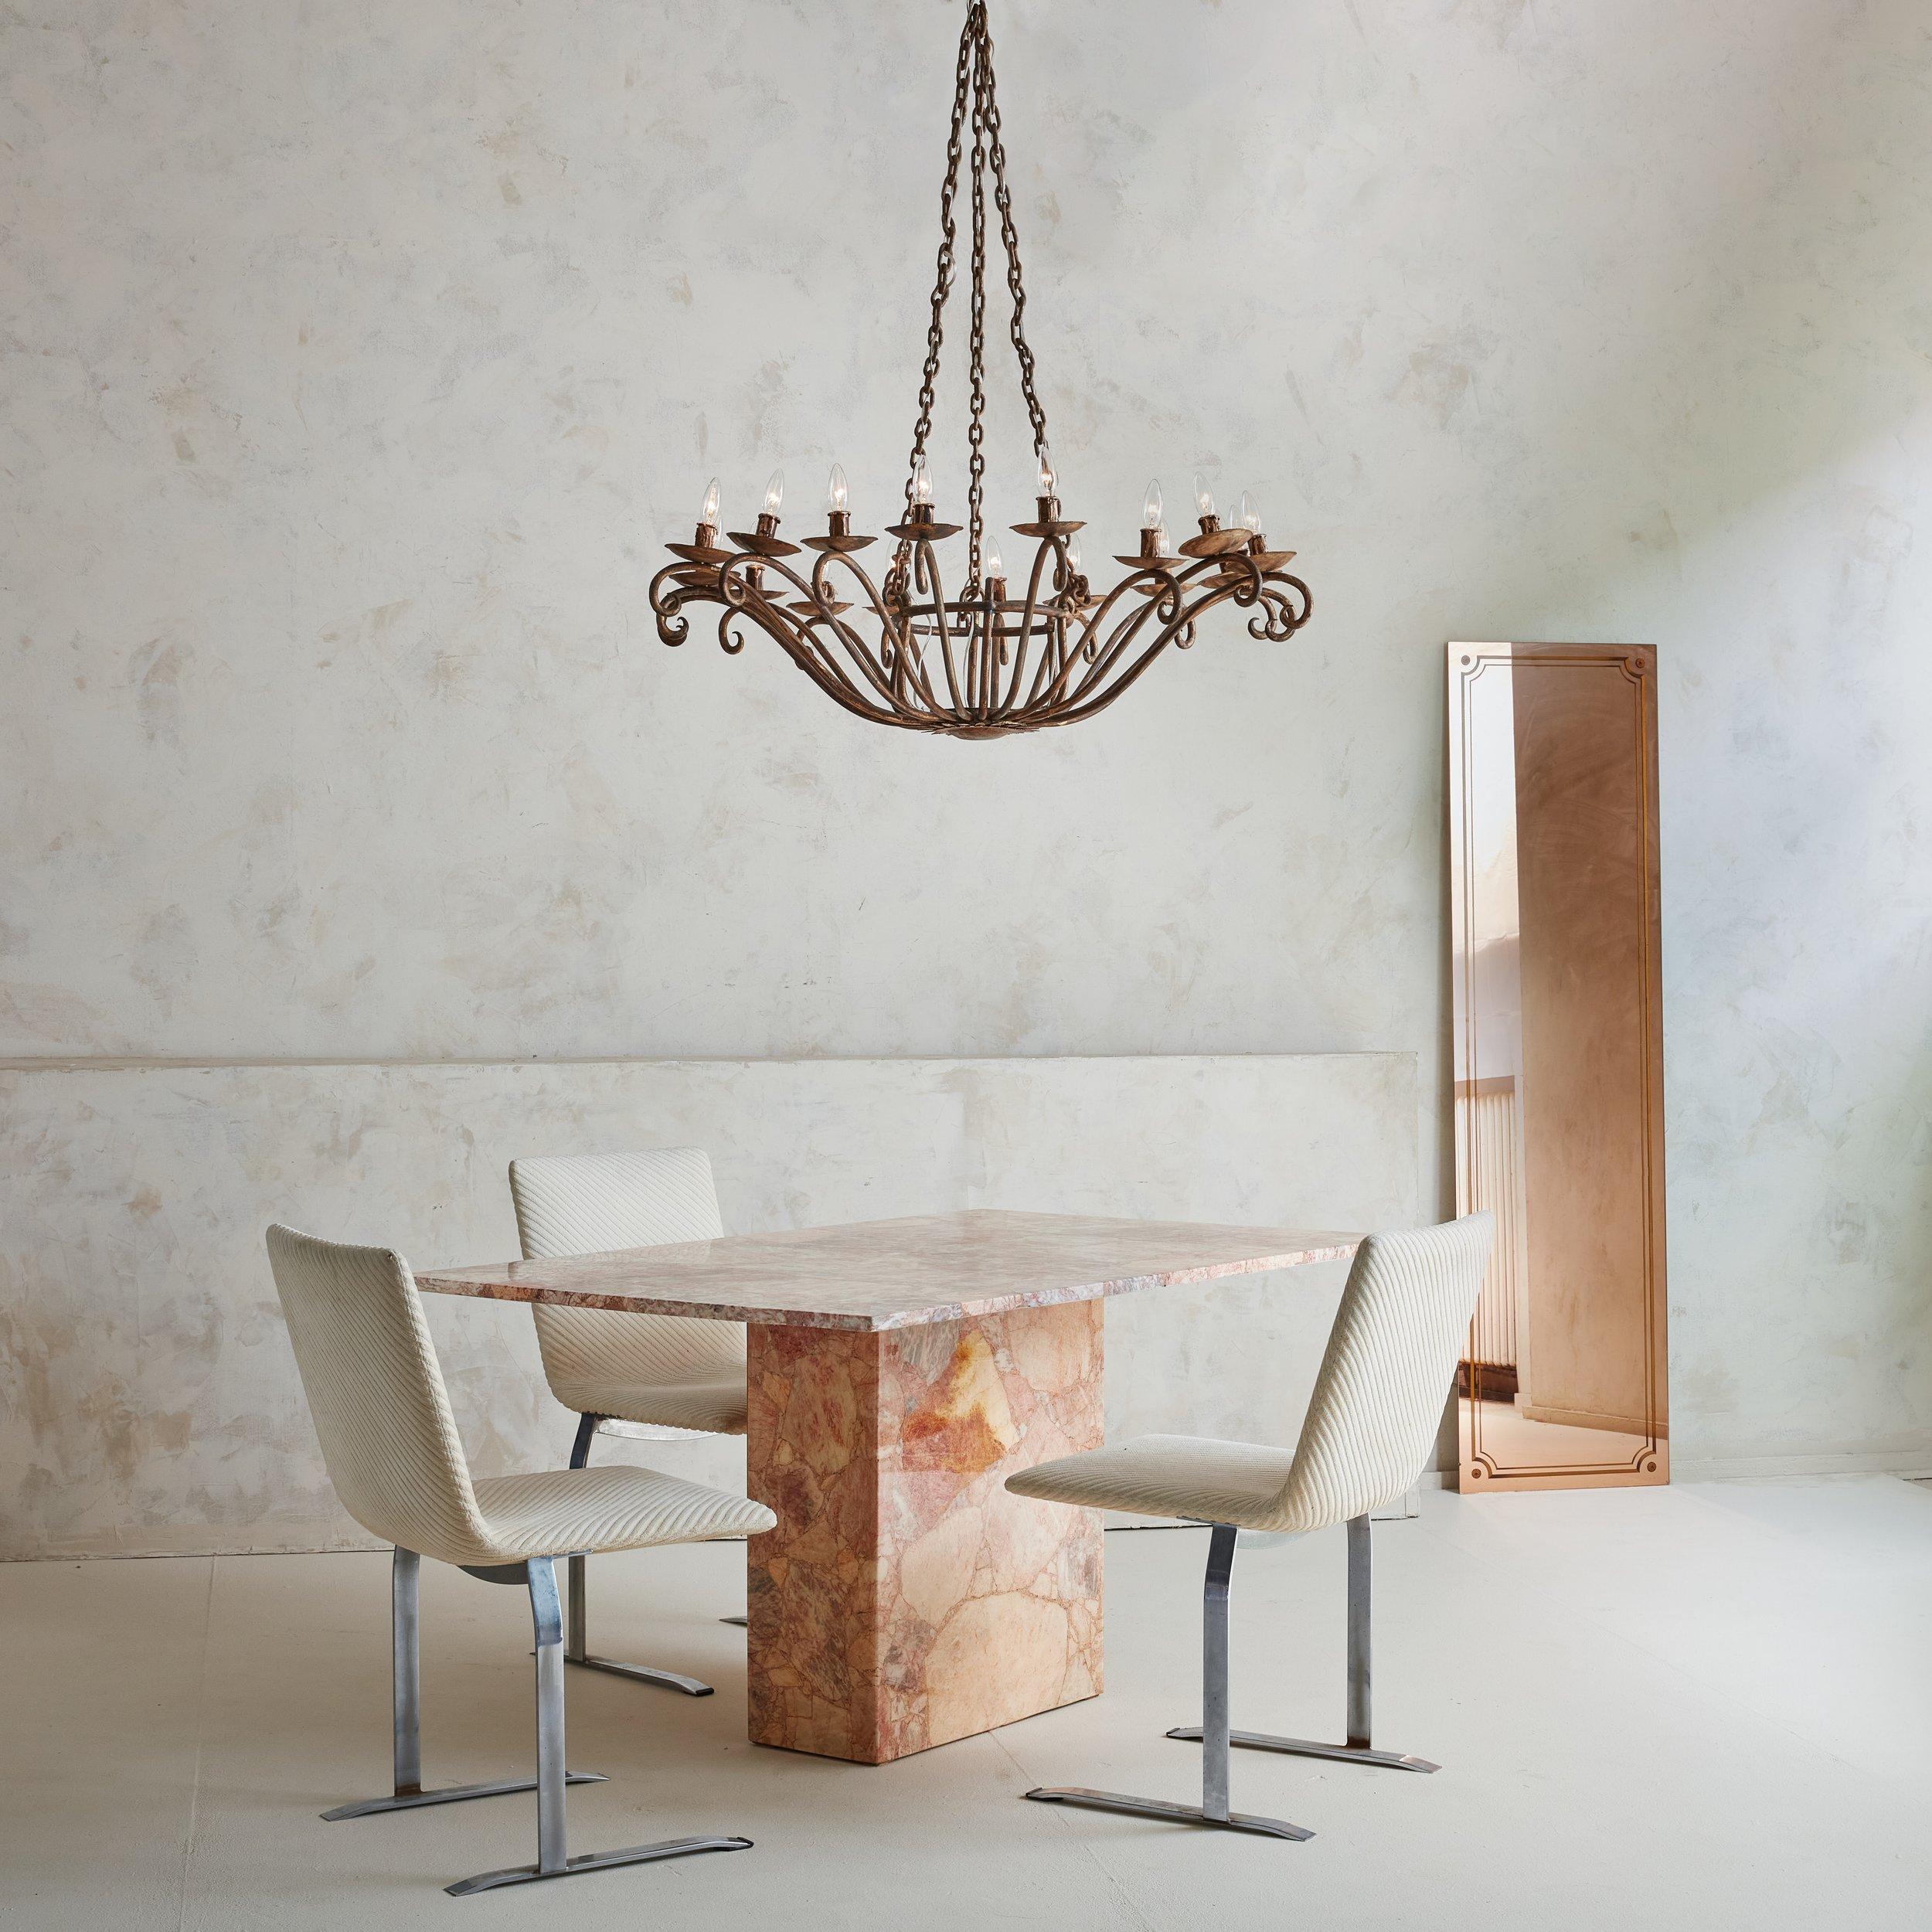 A completely stunning stone dining table from the 1970s featuring pink and peach stone. Assembled in a terrazzo style format, large pieces of stone quarried in Mexico have been assembled together to form the table top and rectangular base. 
 

